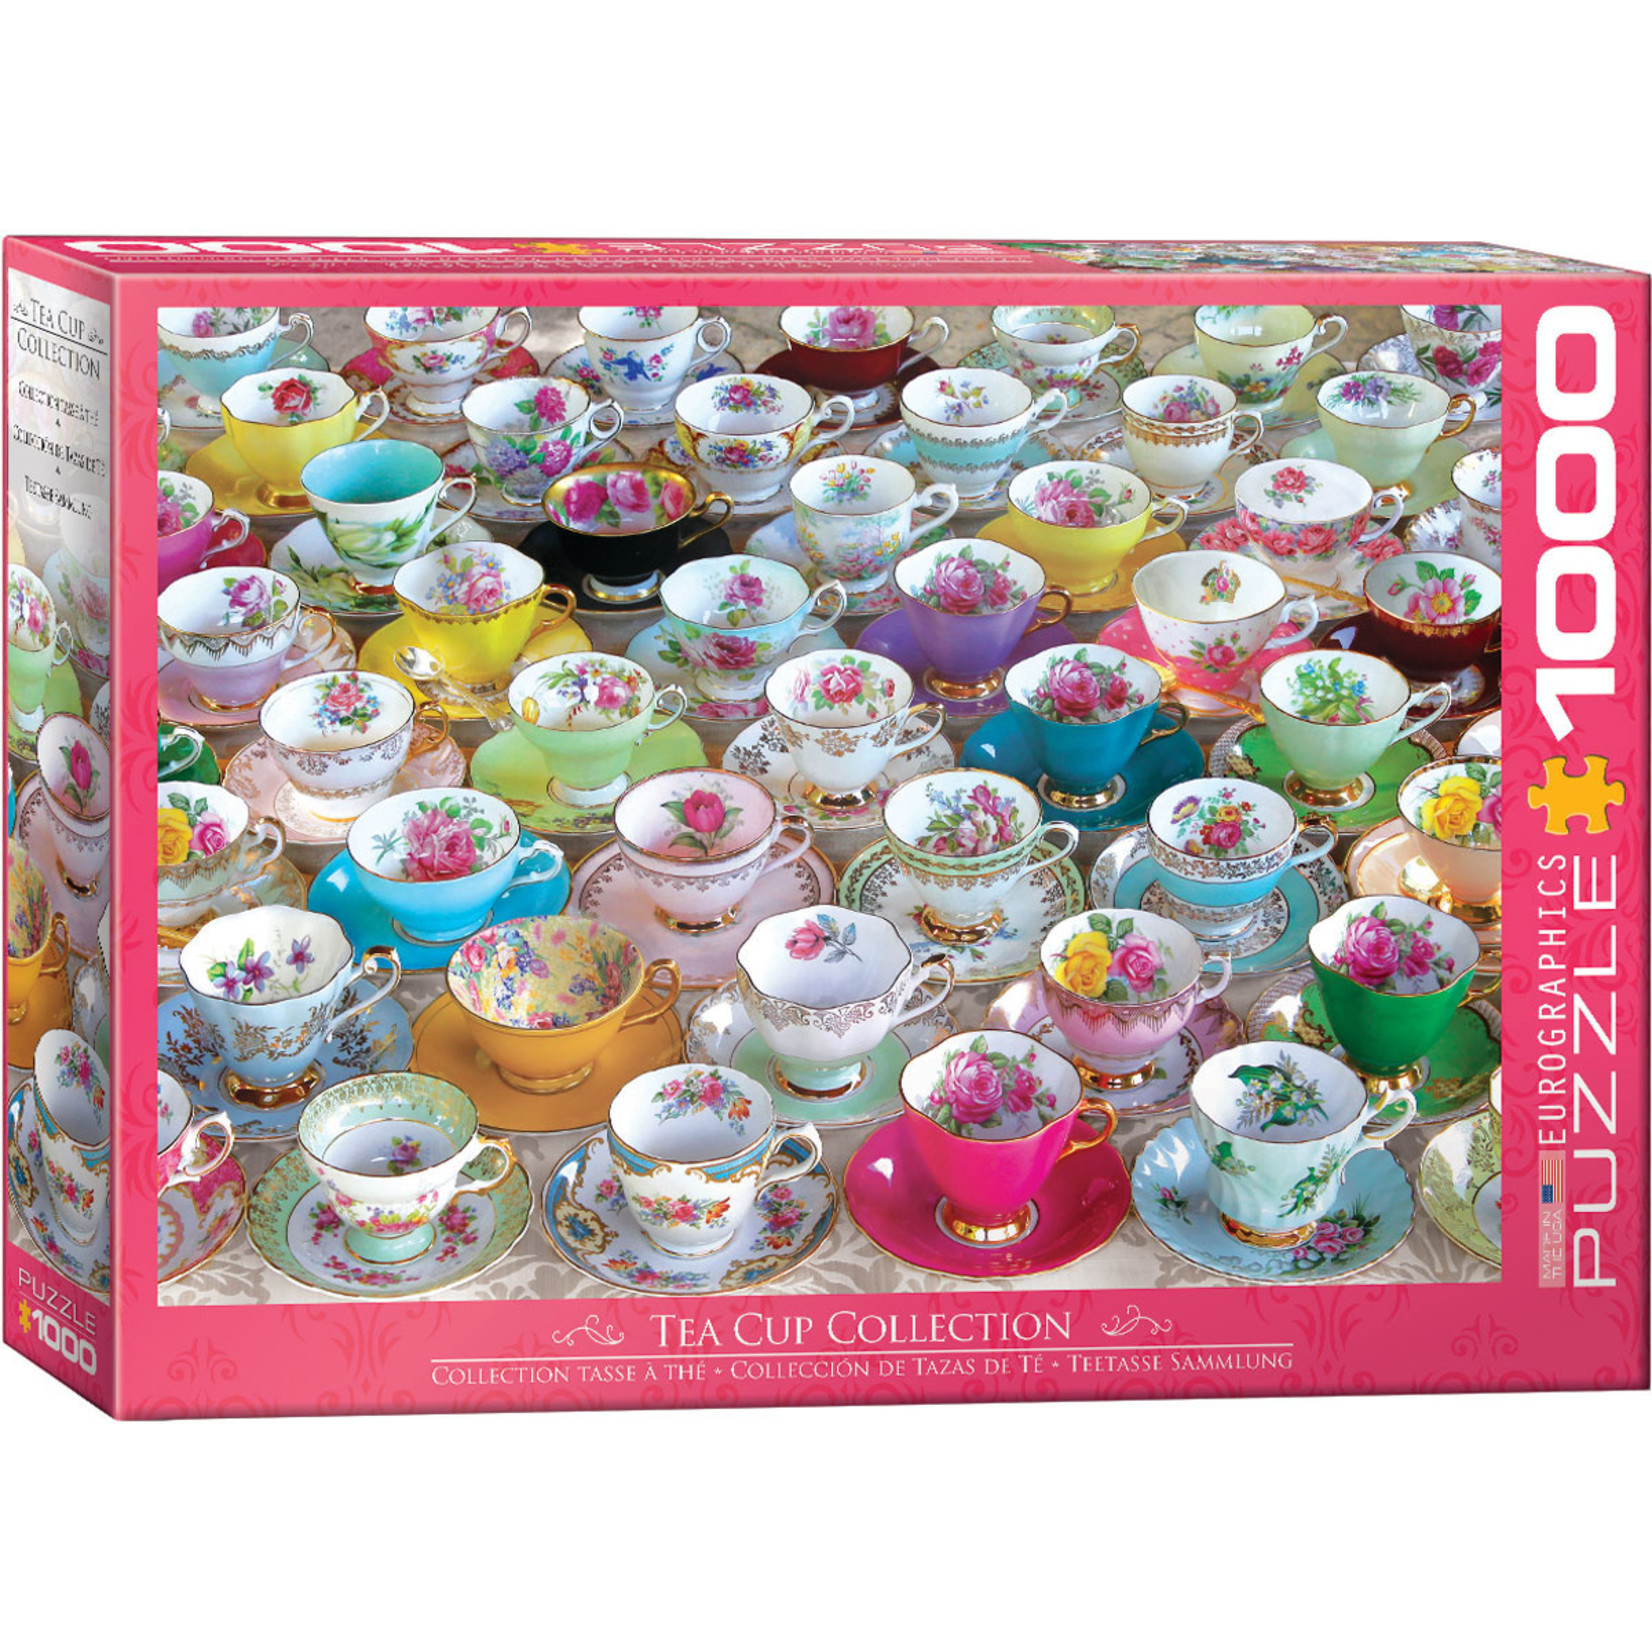 EuroGraphics Puzzles Tea Cup Collection 1000pc